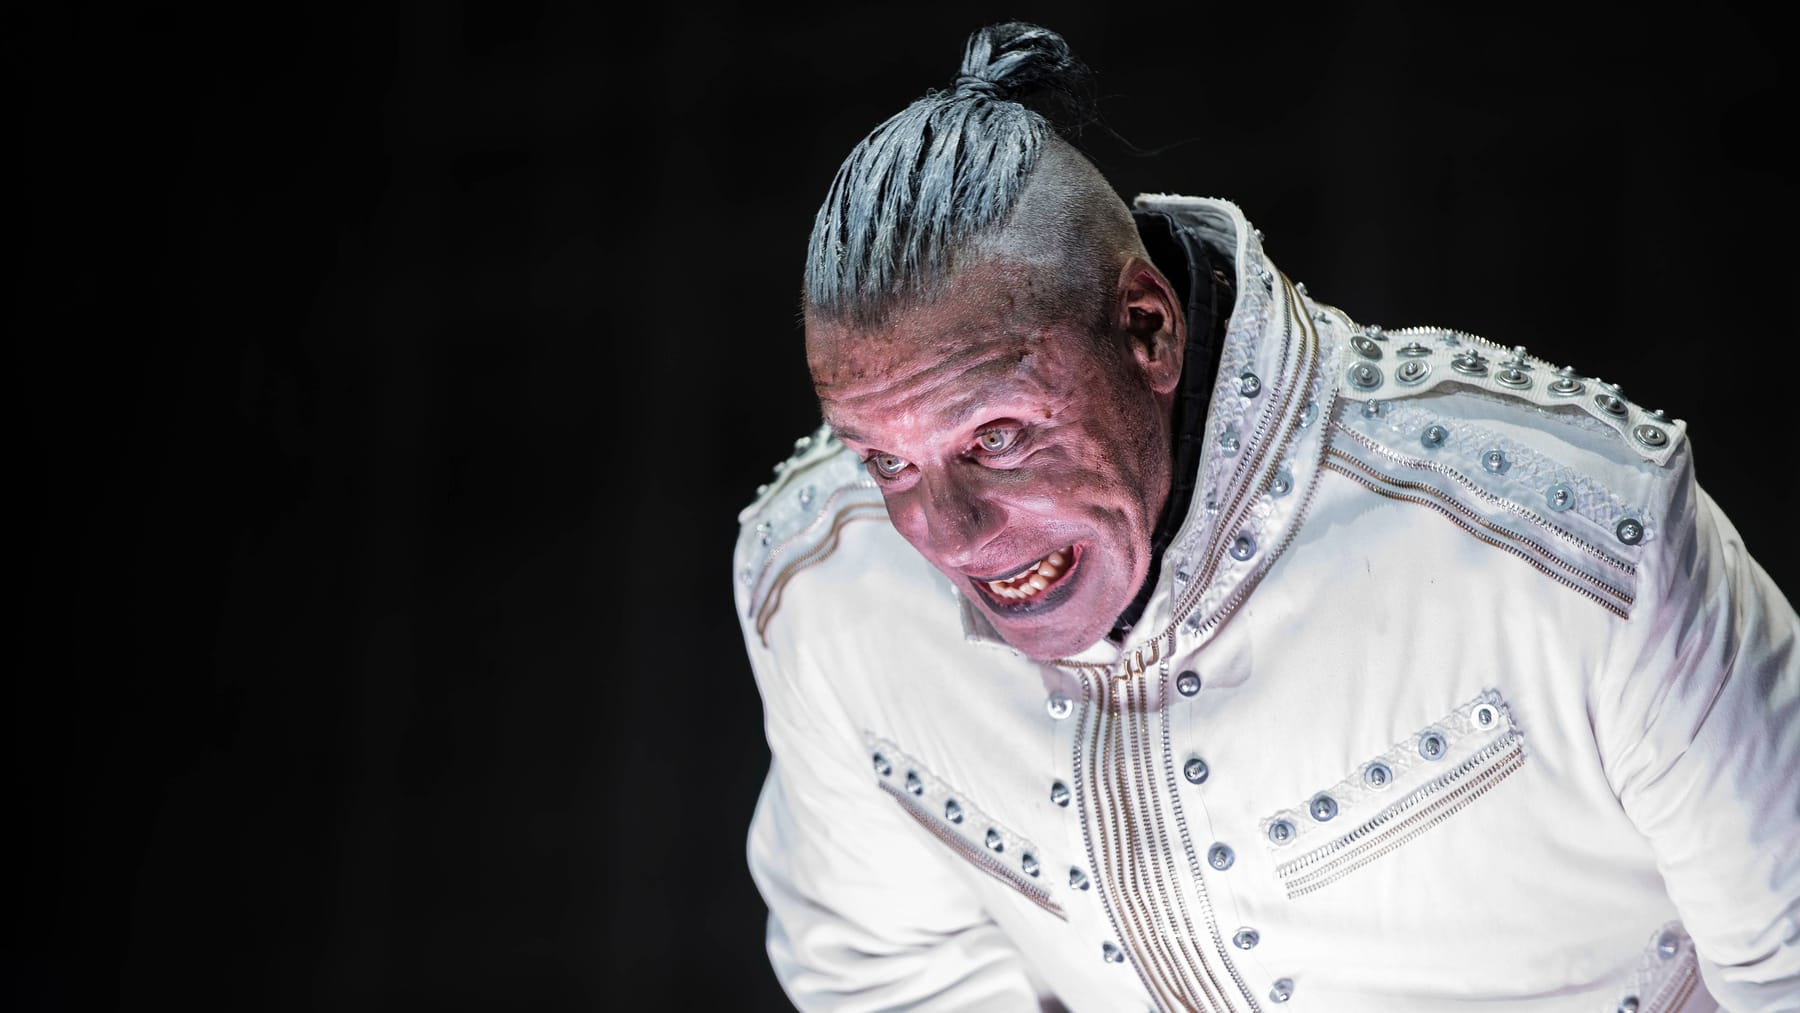 Till Lindemann: “The case should be a lesson for the judiciary” |  comment